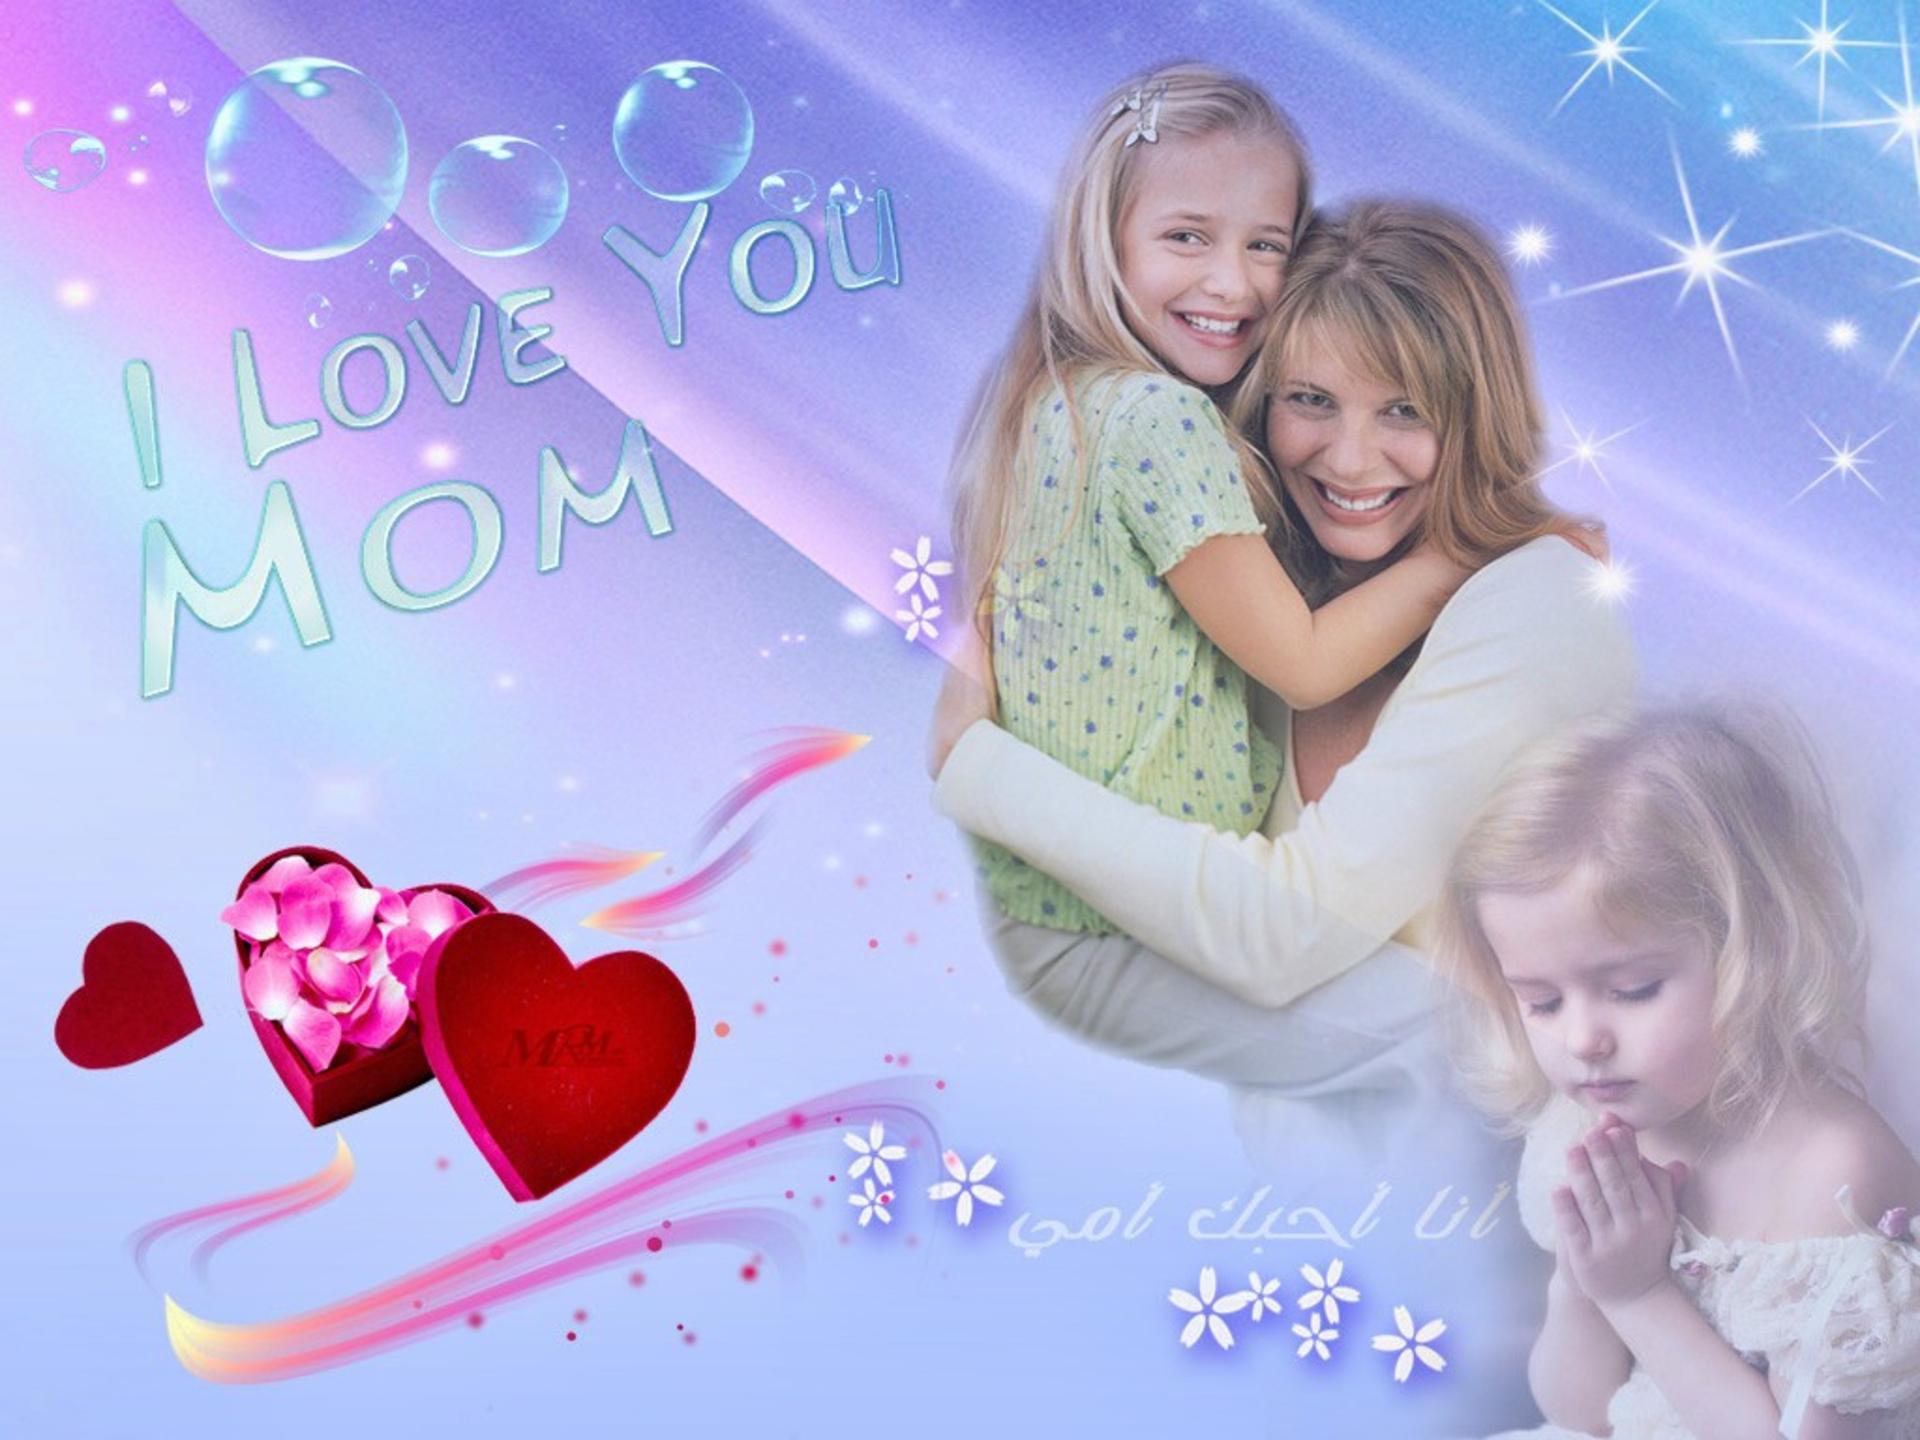 Free Download Love You Mom Backgrounds 7745 Hd Wallpapers In Love Imagescicom 19x1440 For Your Desktop Mobile Tablet Explore 70 Mom Wallpaper I Love You Mom Wallpaper Free Mothers